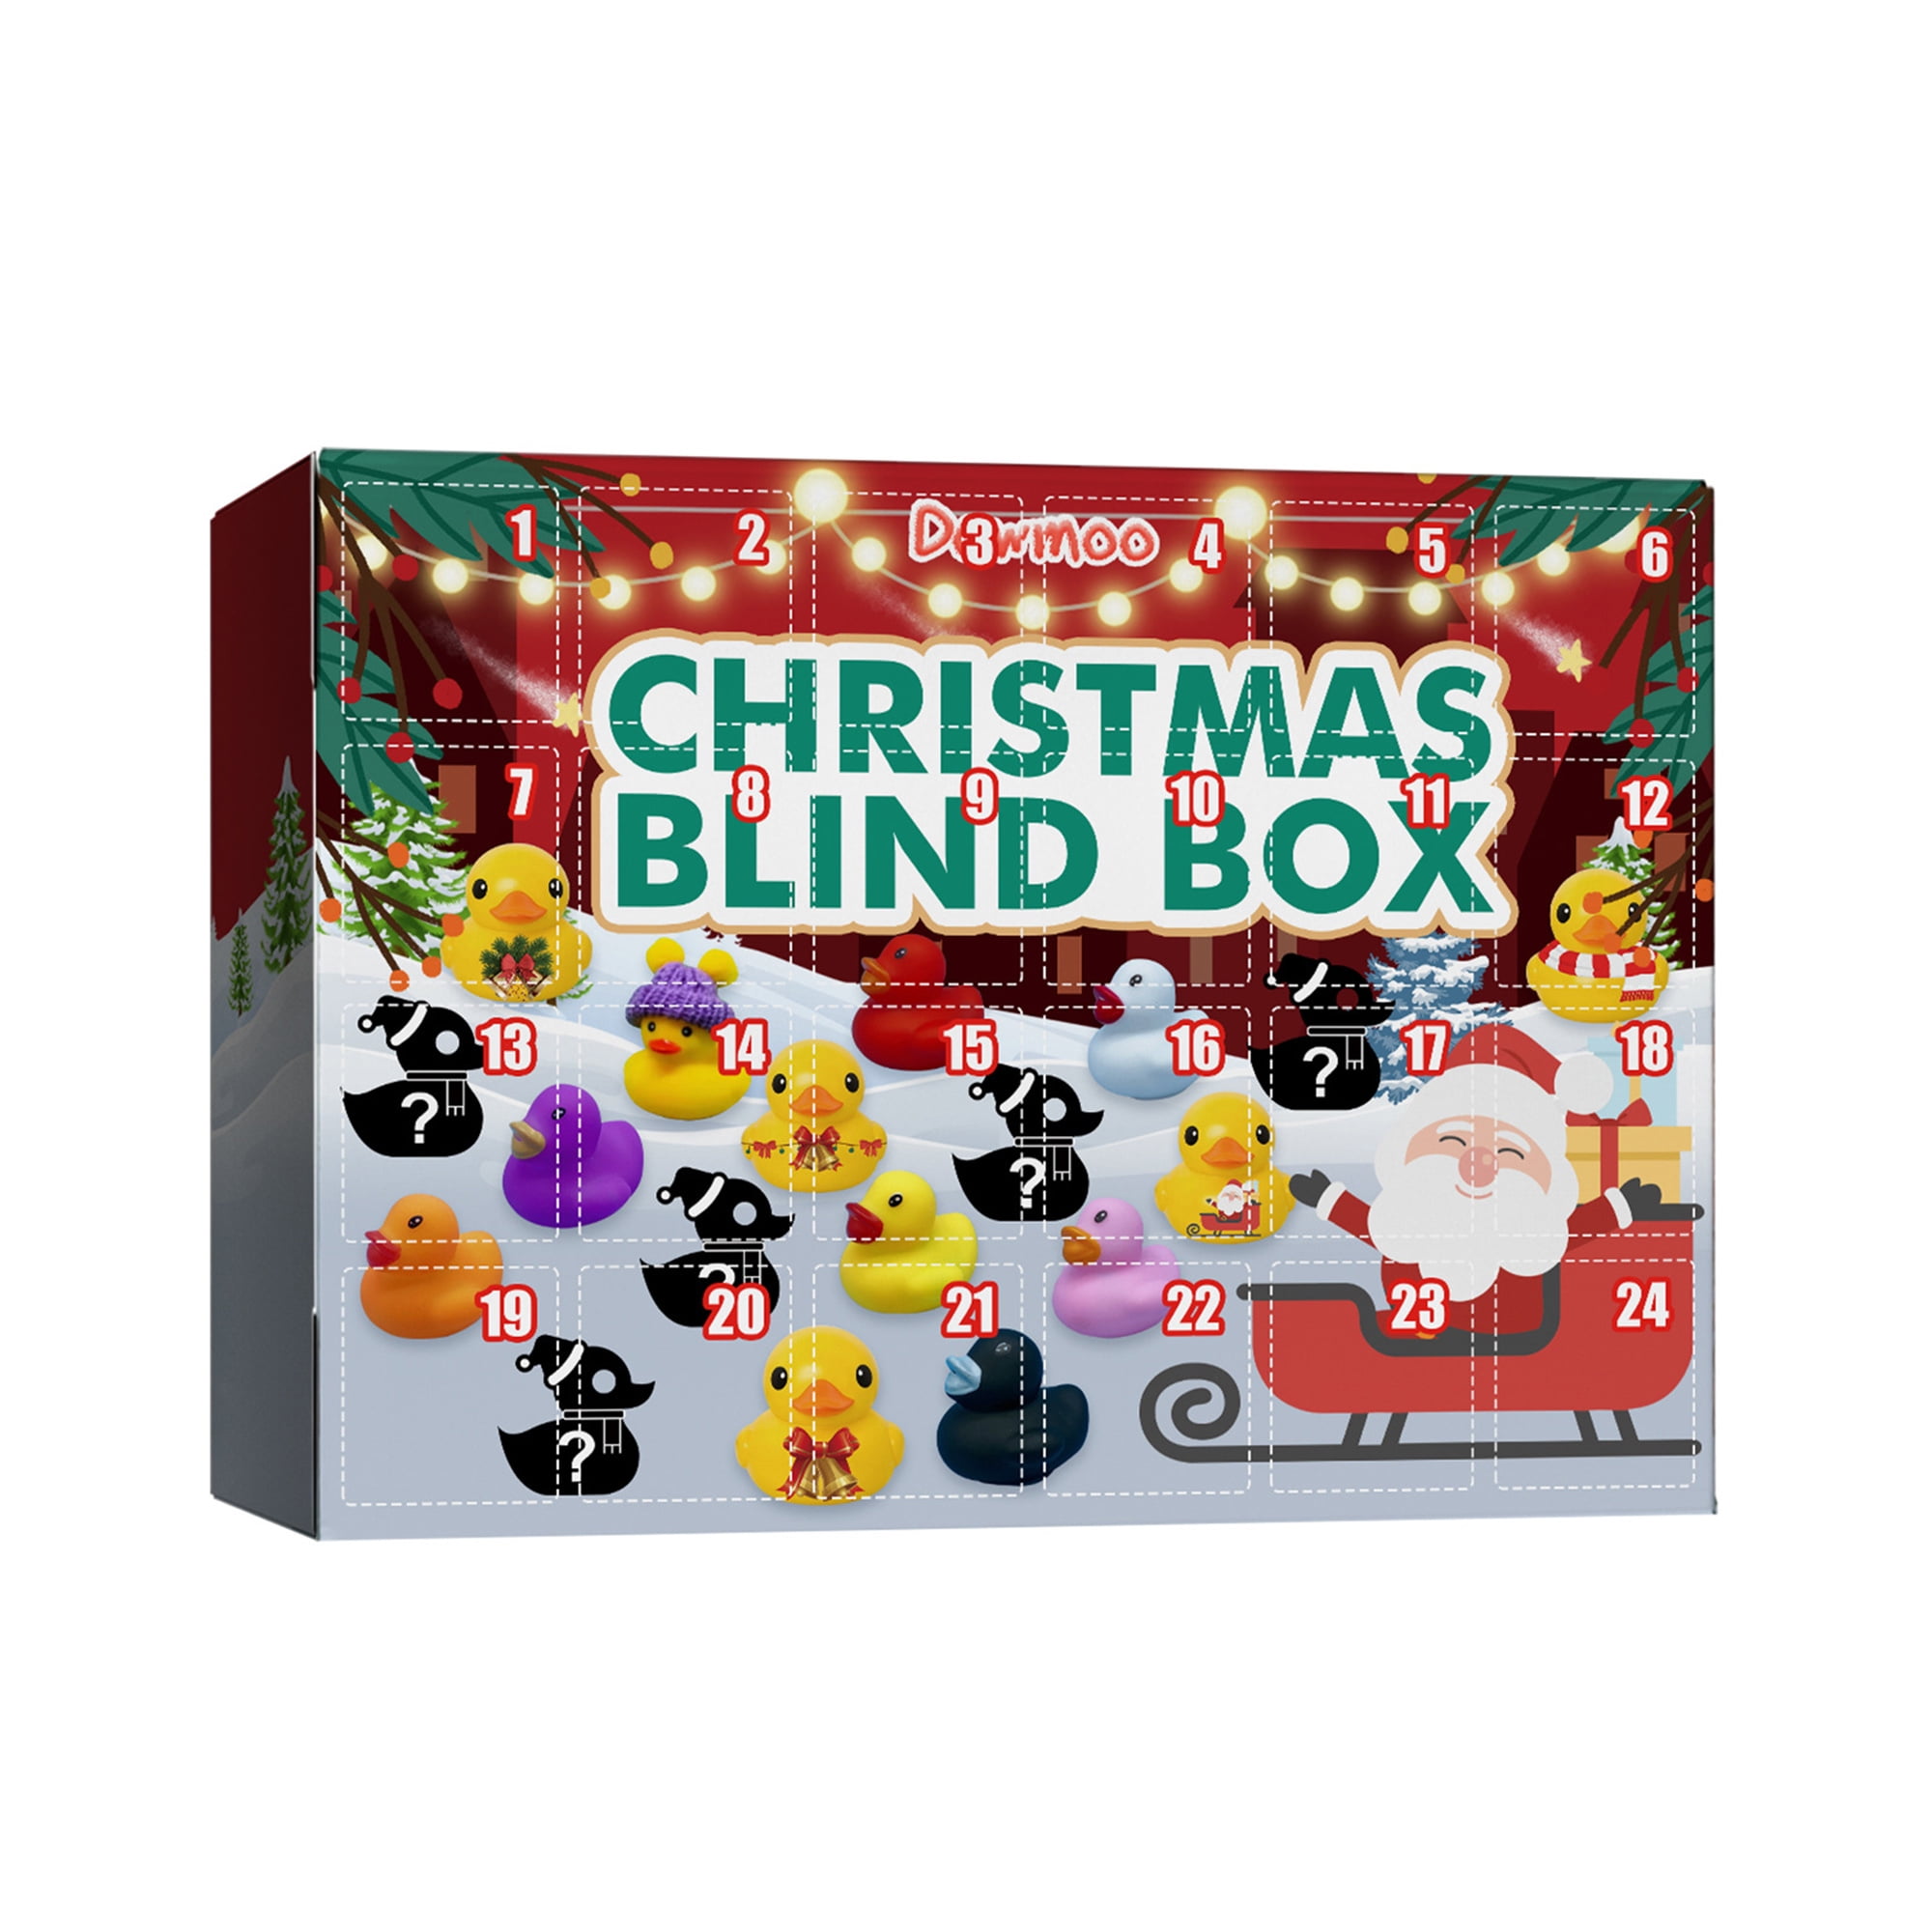 Tukinala Christmas Advent Calendar Funny Magic Props Blind Box Of Tricks  Toy Amazing Tricks Kids Magical Educational Toy Friends Gifts | Boy  Christmas Advent Calendar Gift Shop Truck Patrol Wagon Toys Blind